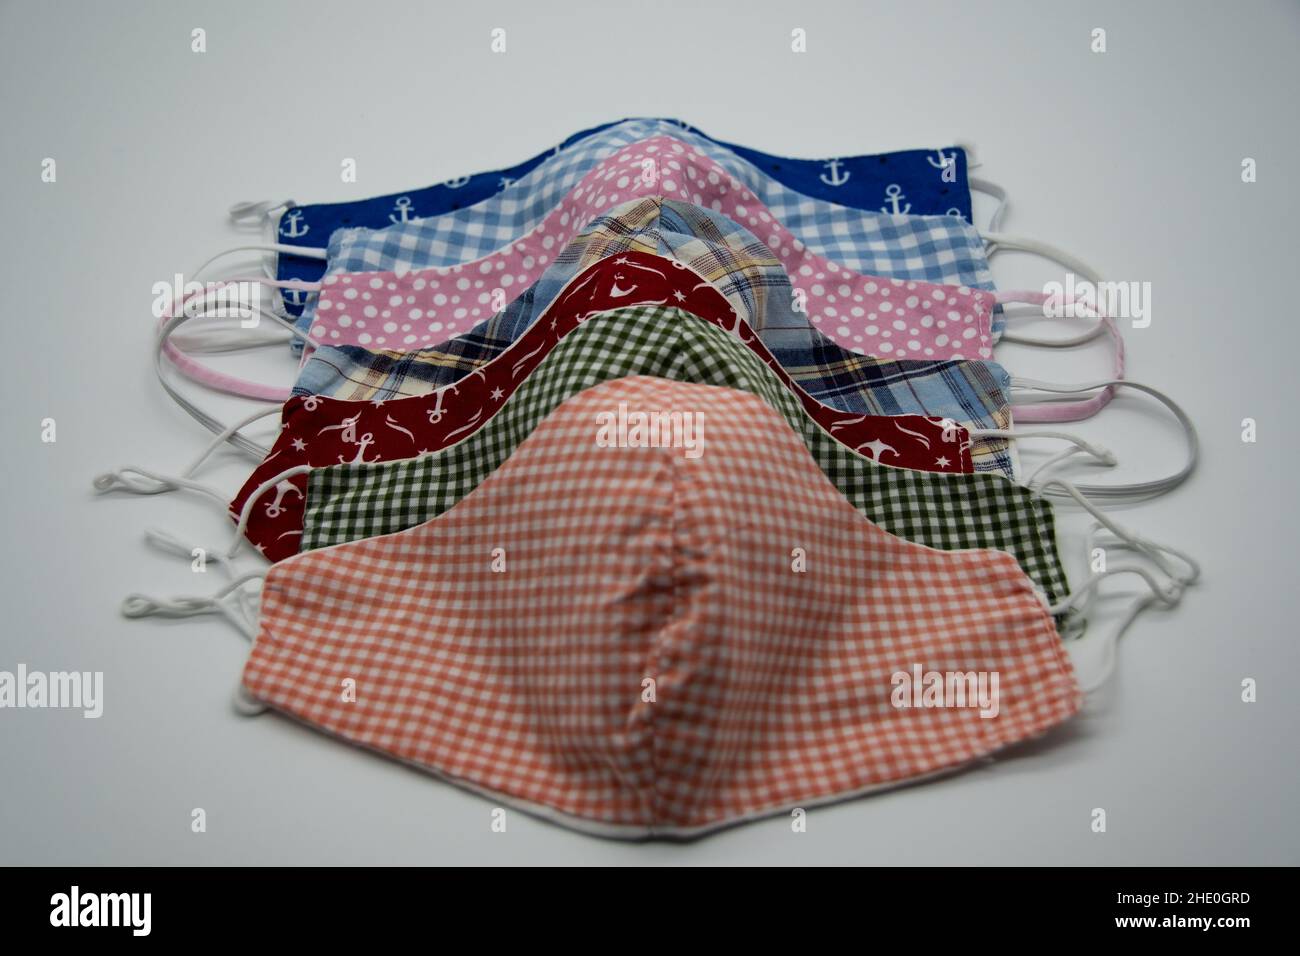 Self-sewn cloth masks to prevent the corona virus on a light background Stock Photo